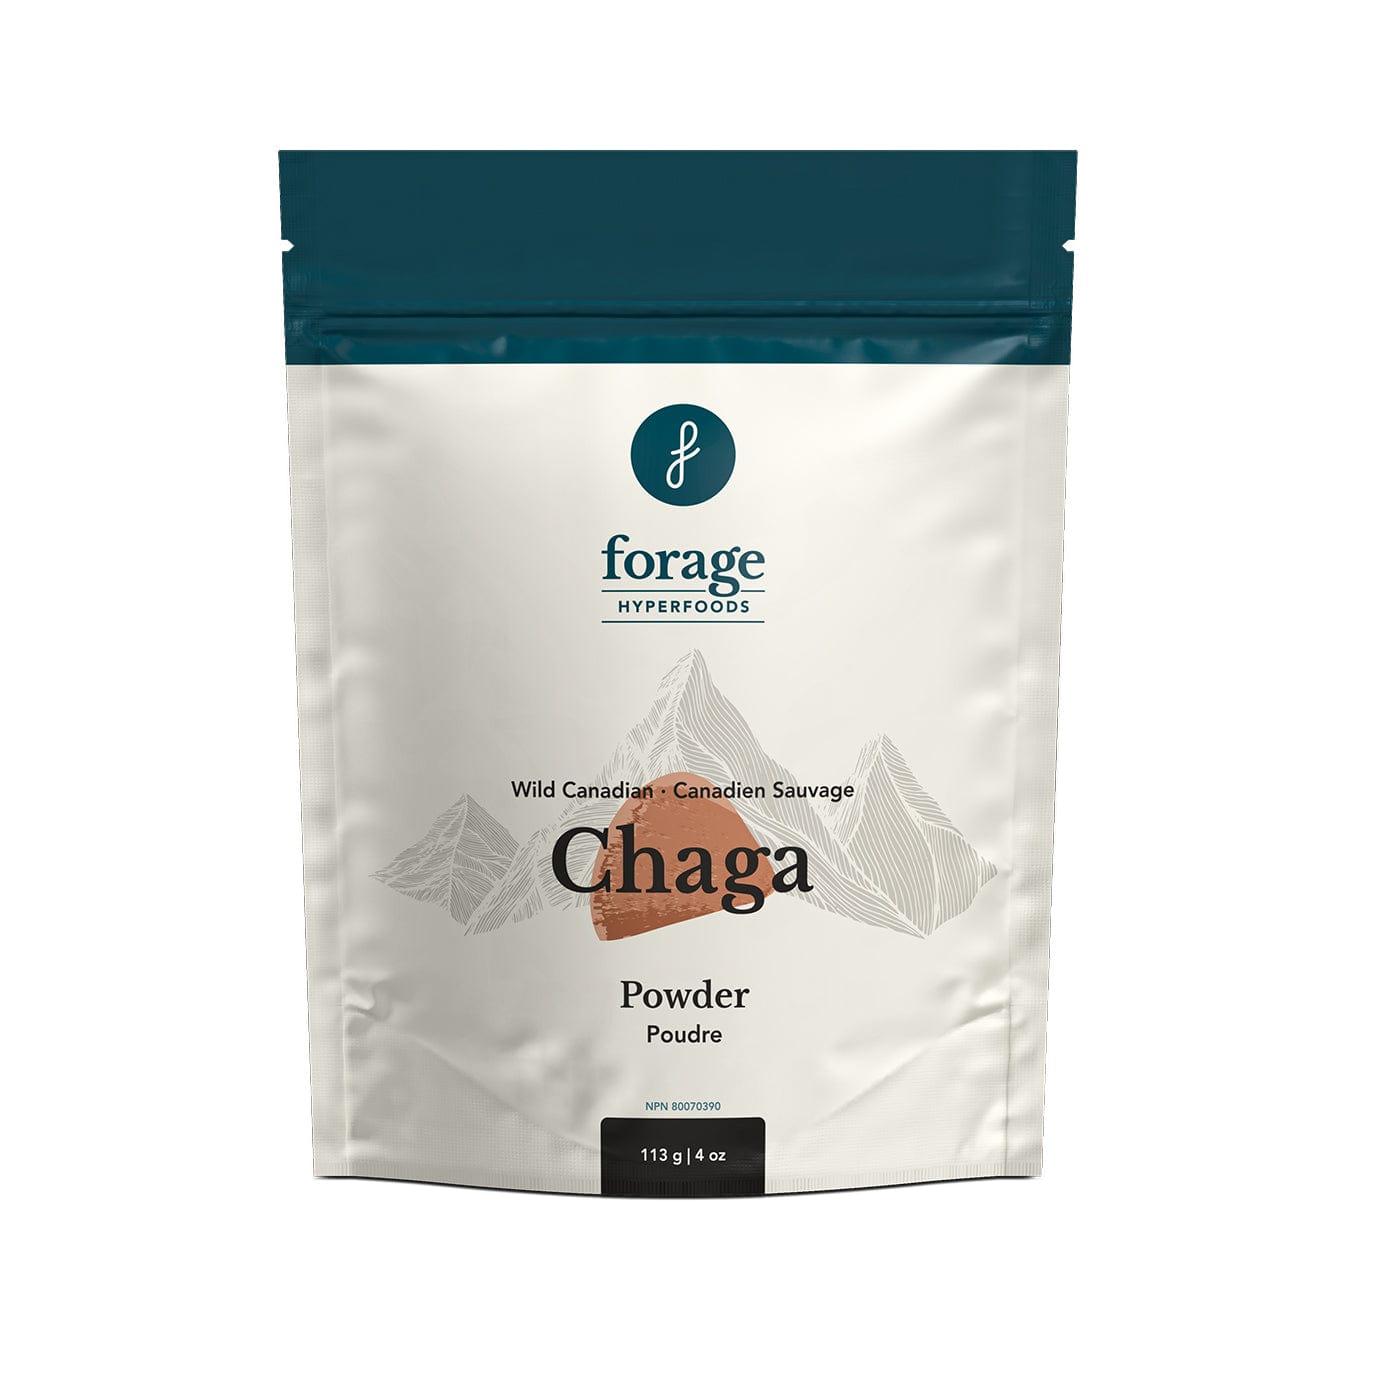 A bag of Canadian Chaga Powder by Forage Hyperfoods.